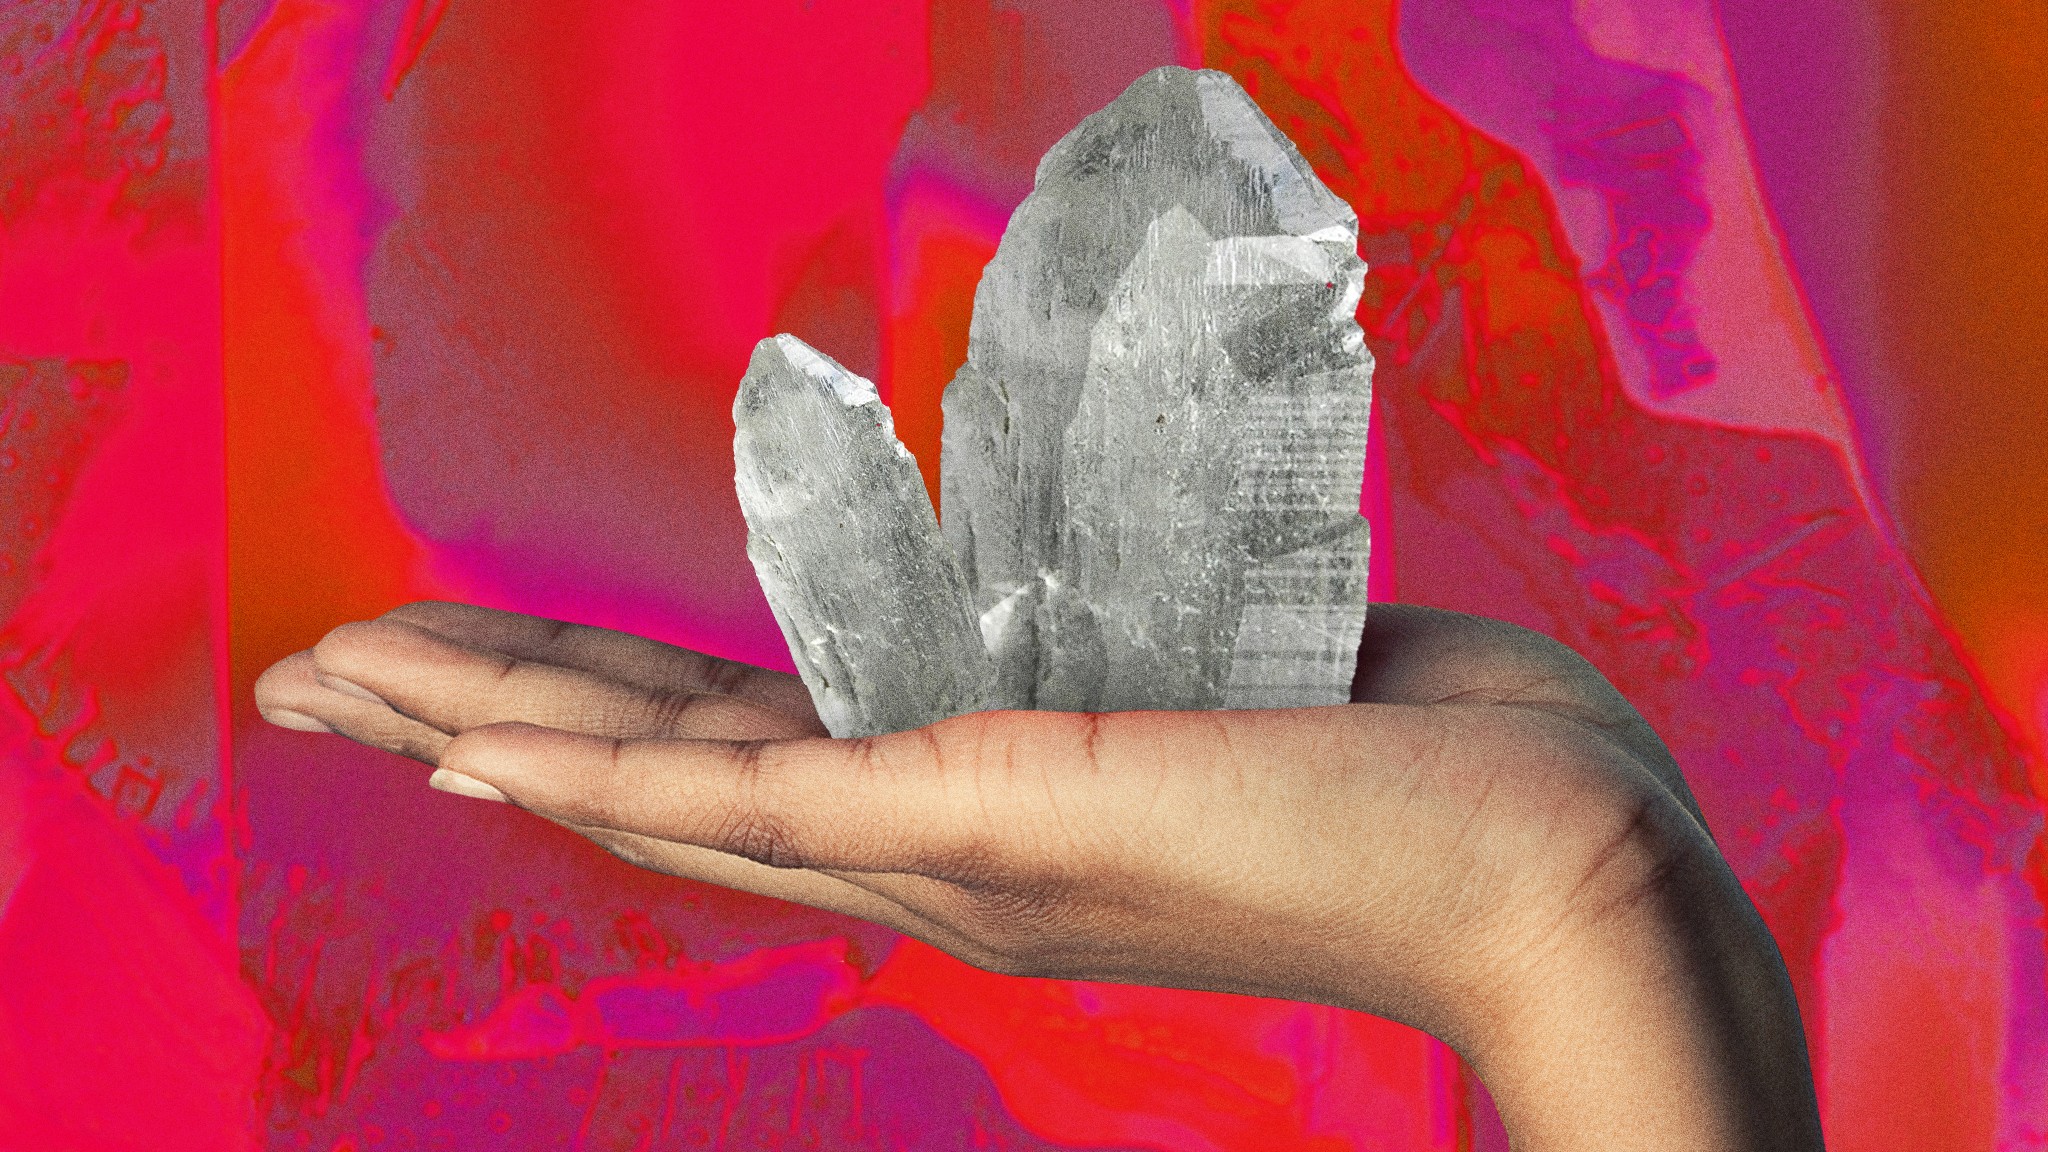 What Happened When I Tried To Use Crystals To Improve My Life